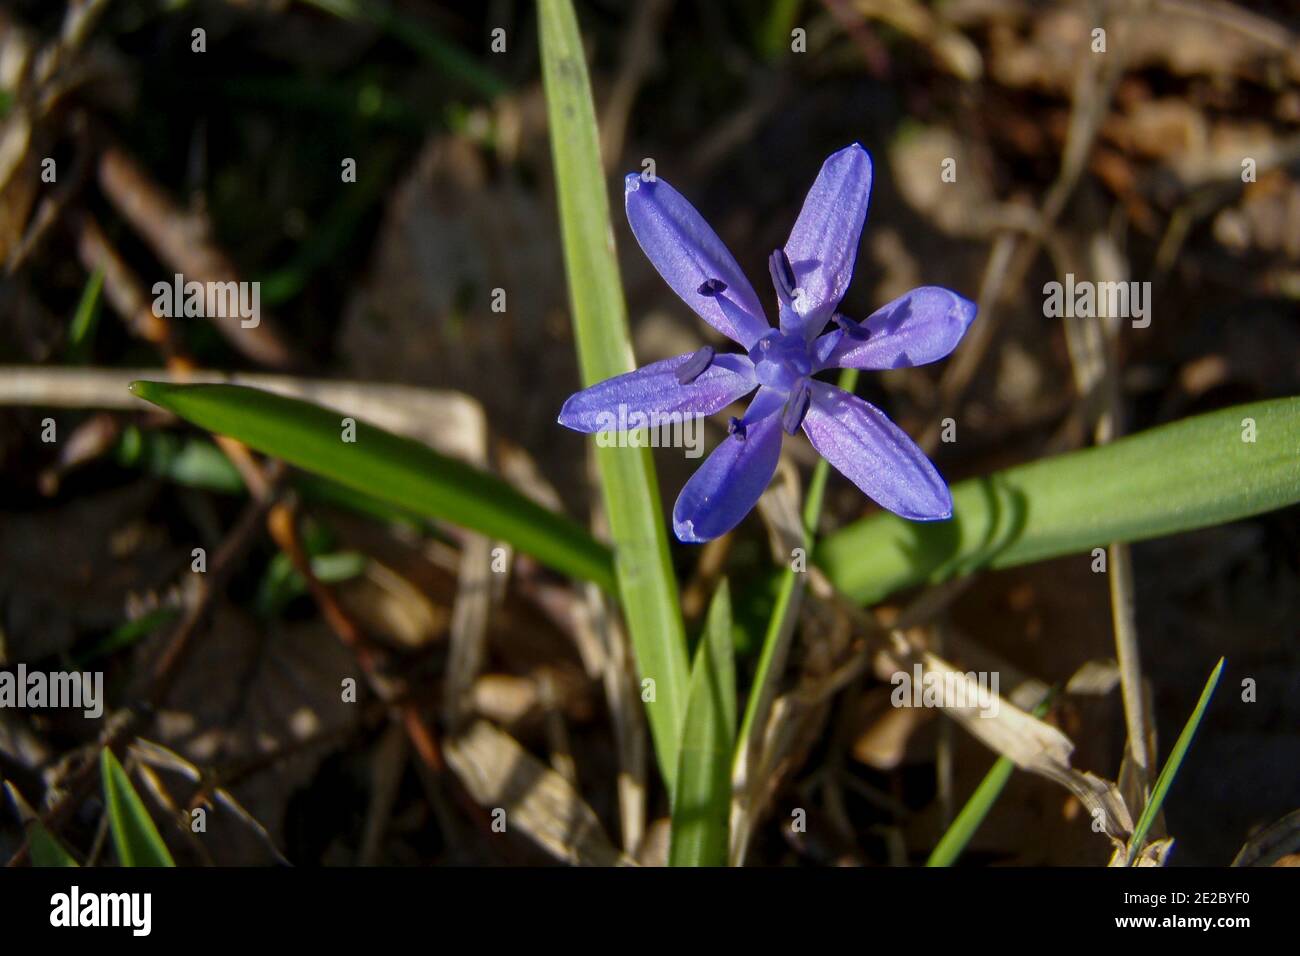 Scilla bifolia (alpine squill or two-leaf squill) is a herbaceous perennial growing from an underground bulb, belonging to the genus Scilla of t Stock Photo